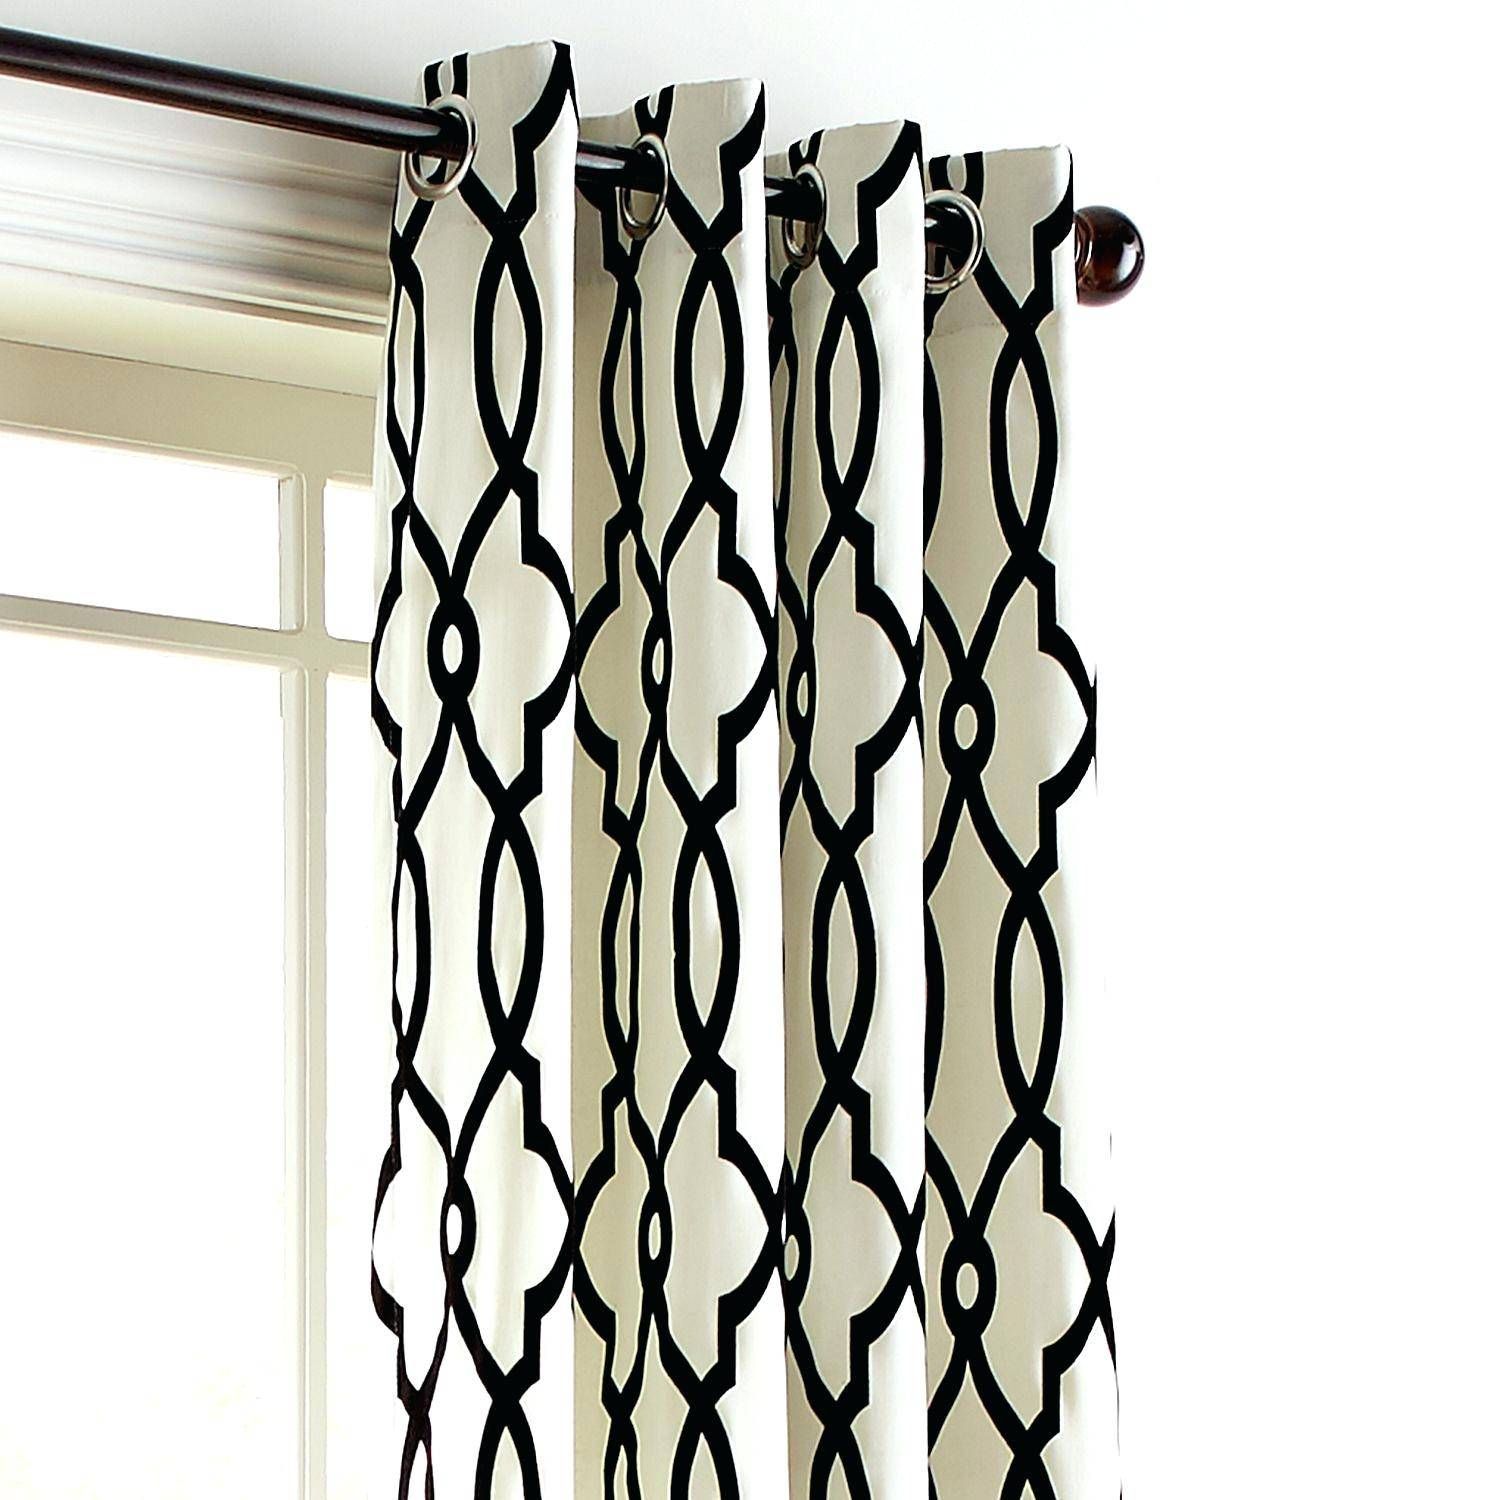 Outstanding Burgundy Patterned Curtains Splendid Modern Throughout Trellis Pattern Window Valances (View 20 of 20)